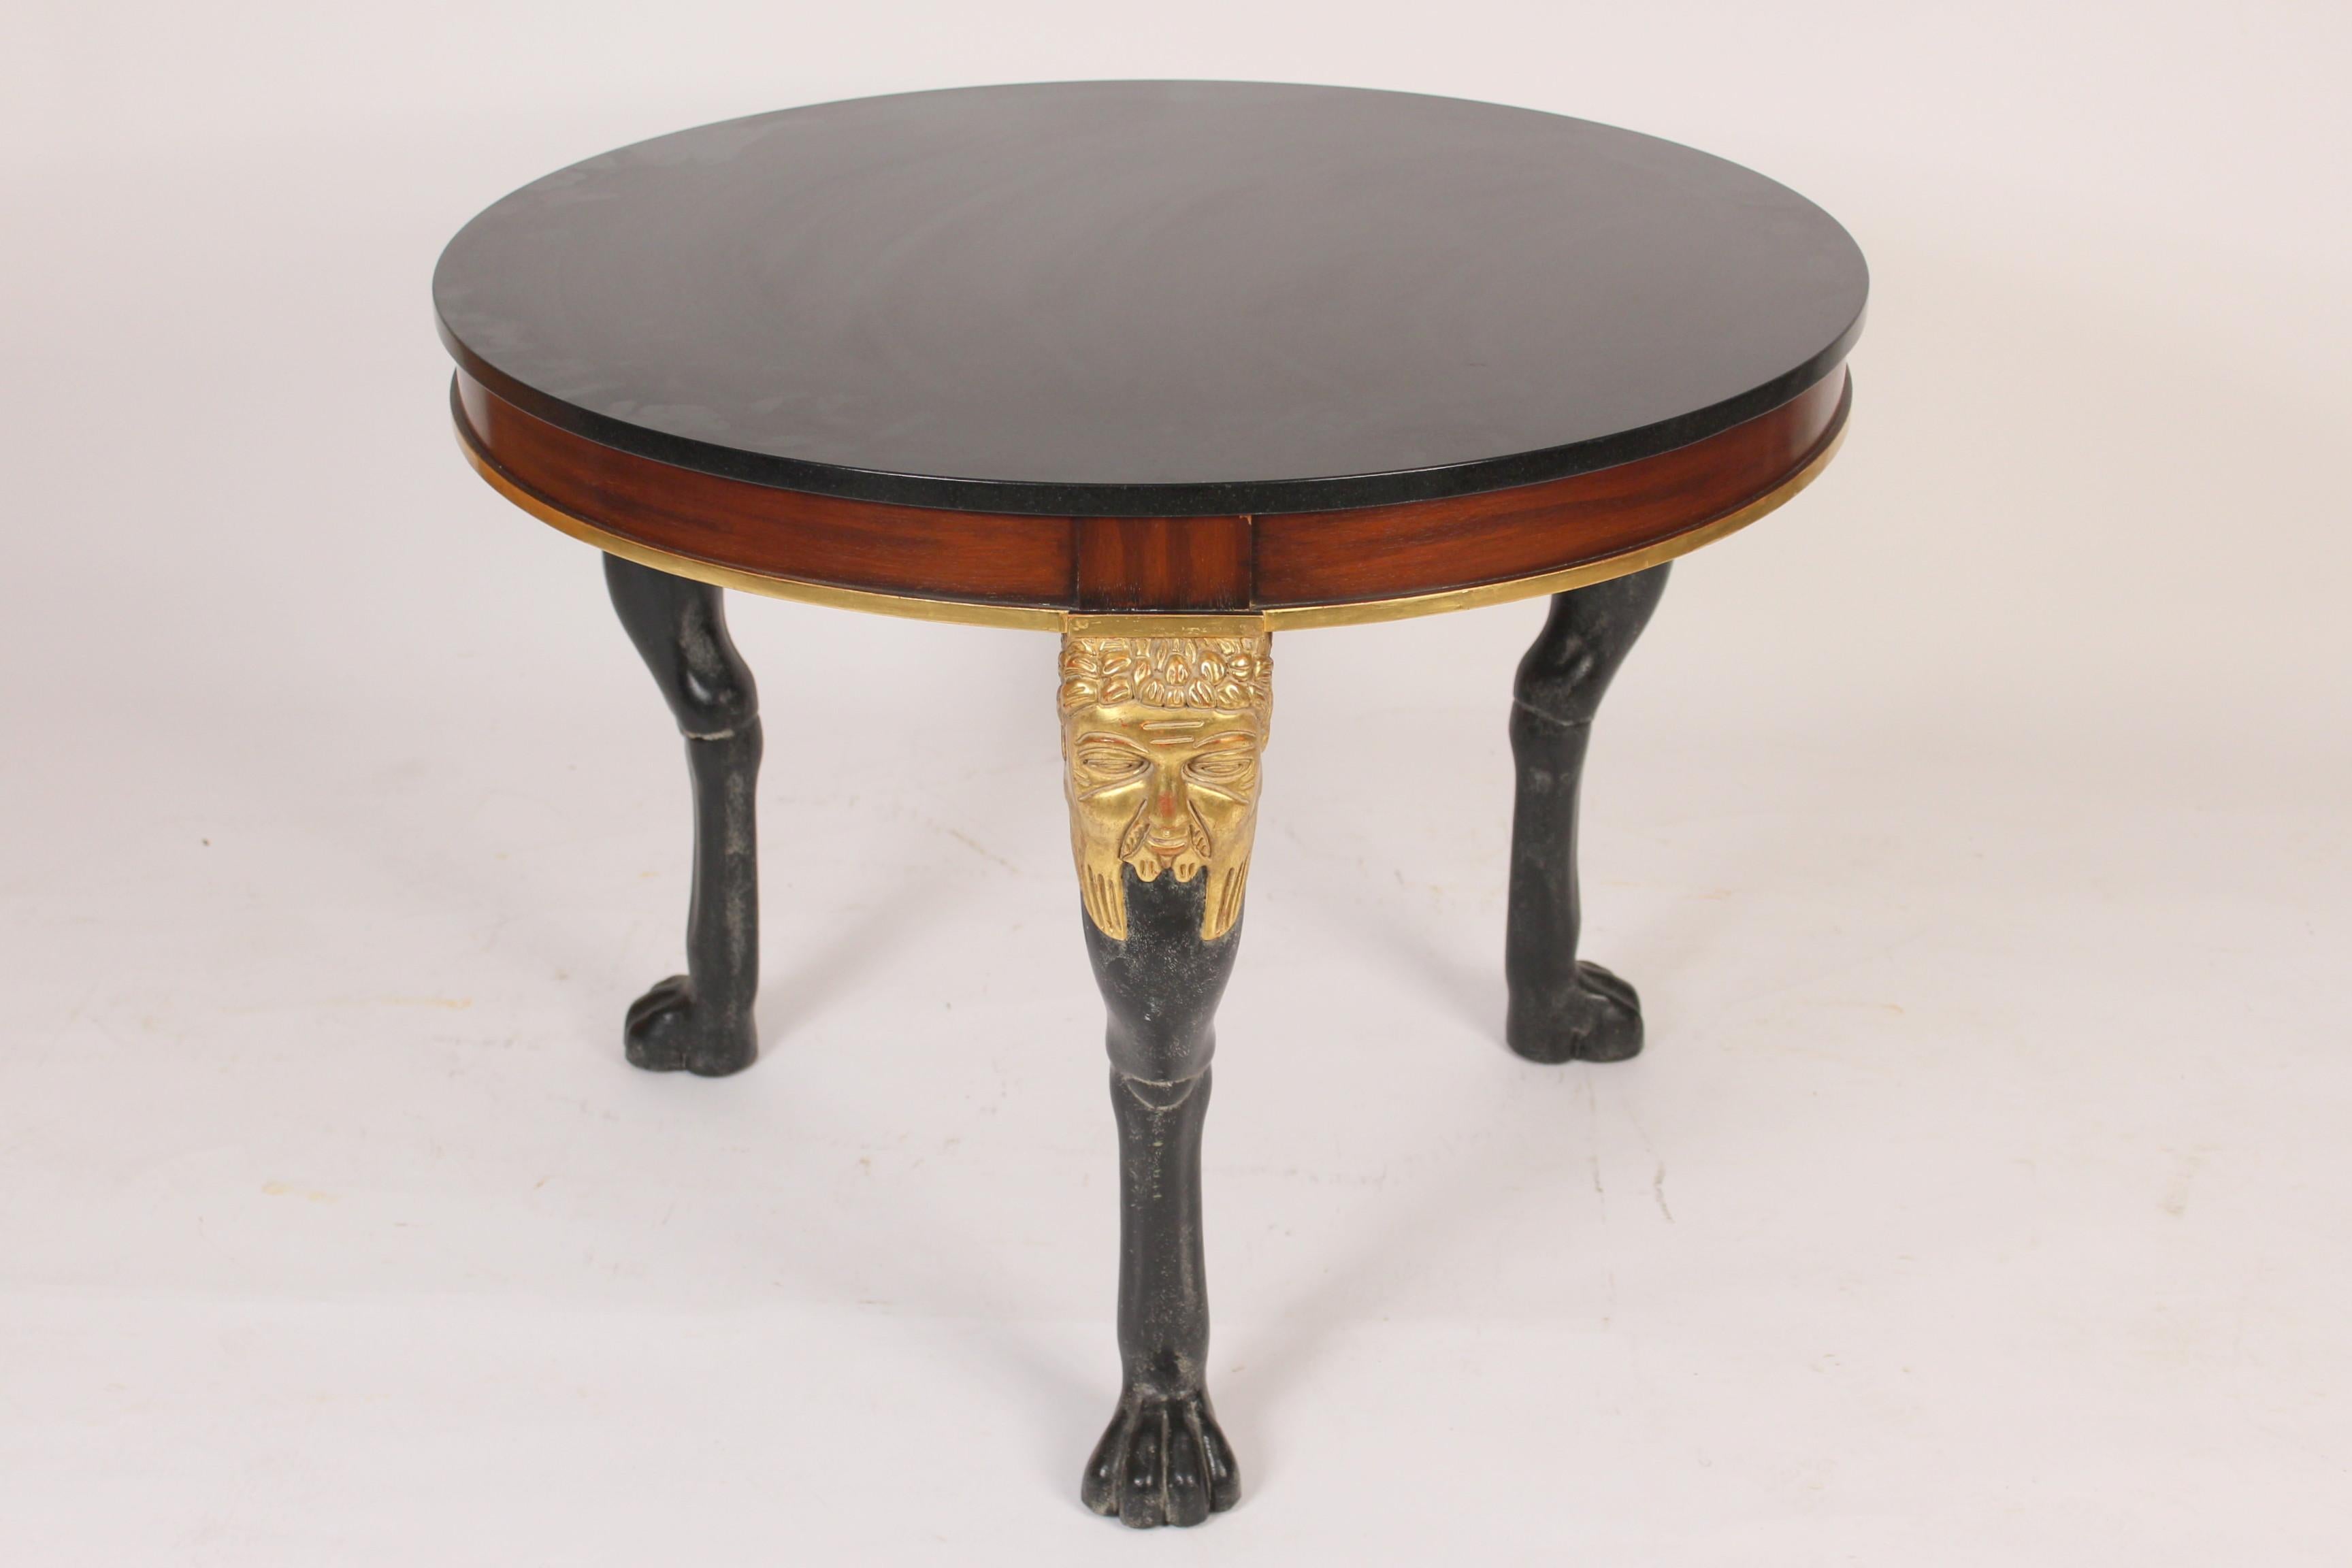 Neoclassical style mahogany, gold leaf and painted center / occasional table with a marble top, circa late 20th century. Inscription on bottom of table indicates an association with Quatrain in Los Angeles, either made by or used on a design project.